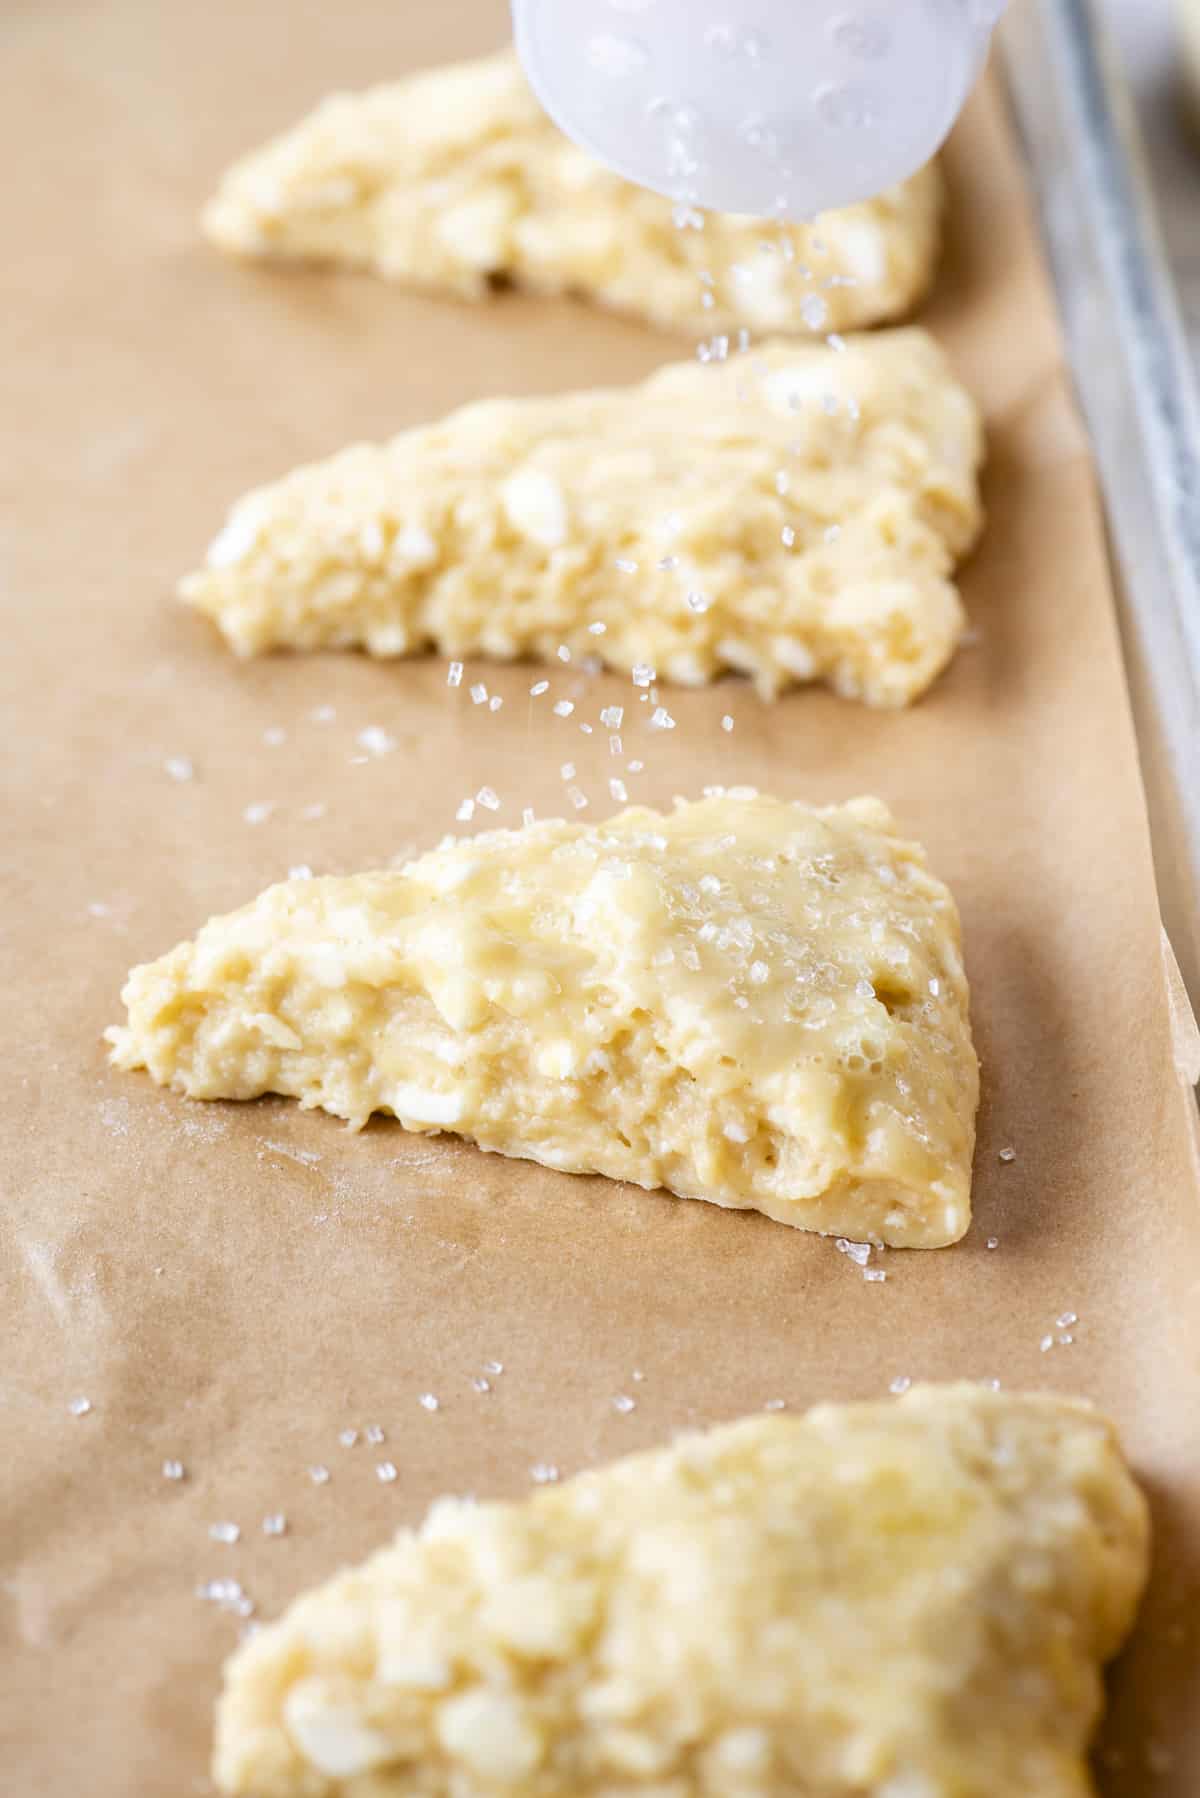 sprinkling scones with coarse salt on a baking sheet lined with parchment paper